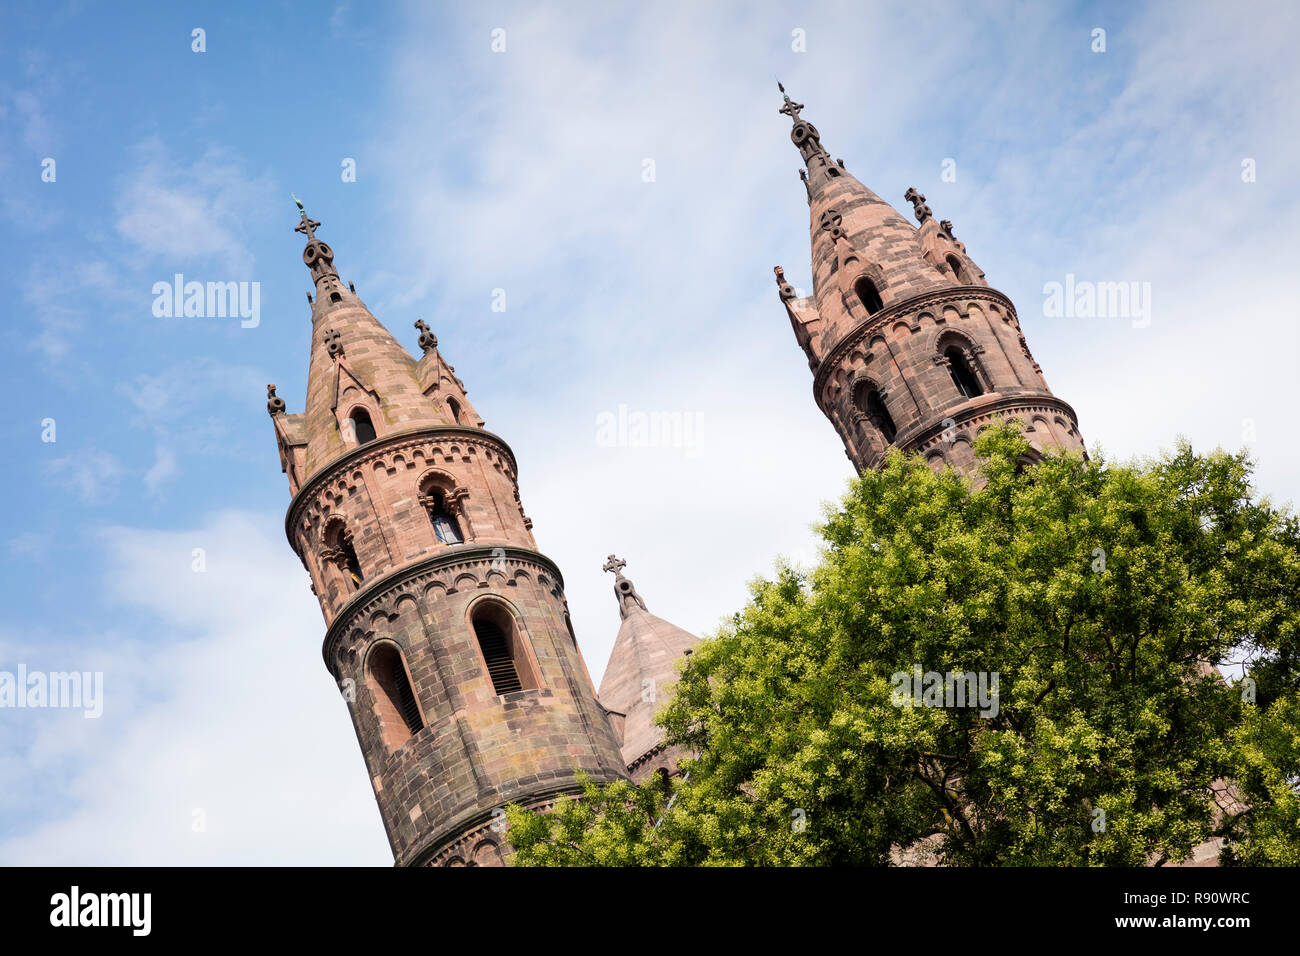 Cathedral St. Peter, Worms, Rhineland-Palatinate, Germany, Europe Stock Photo